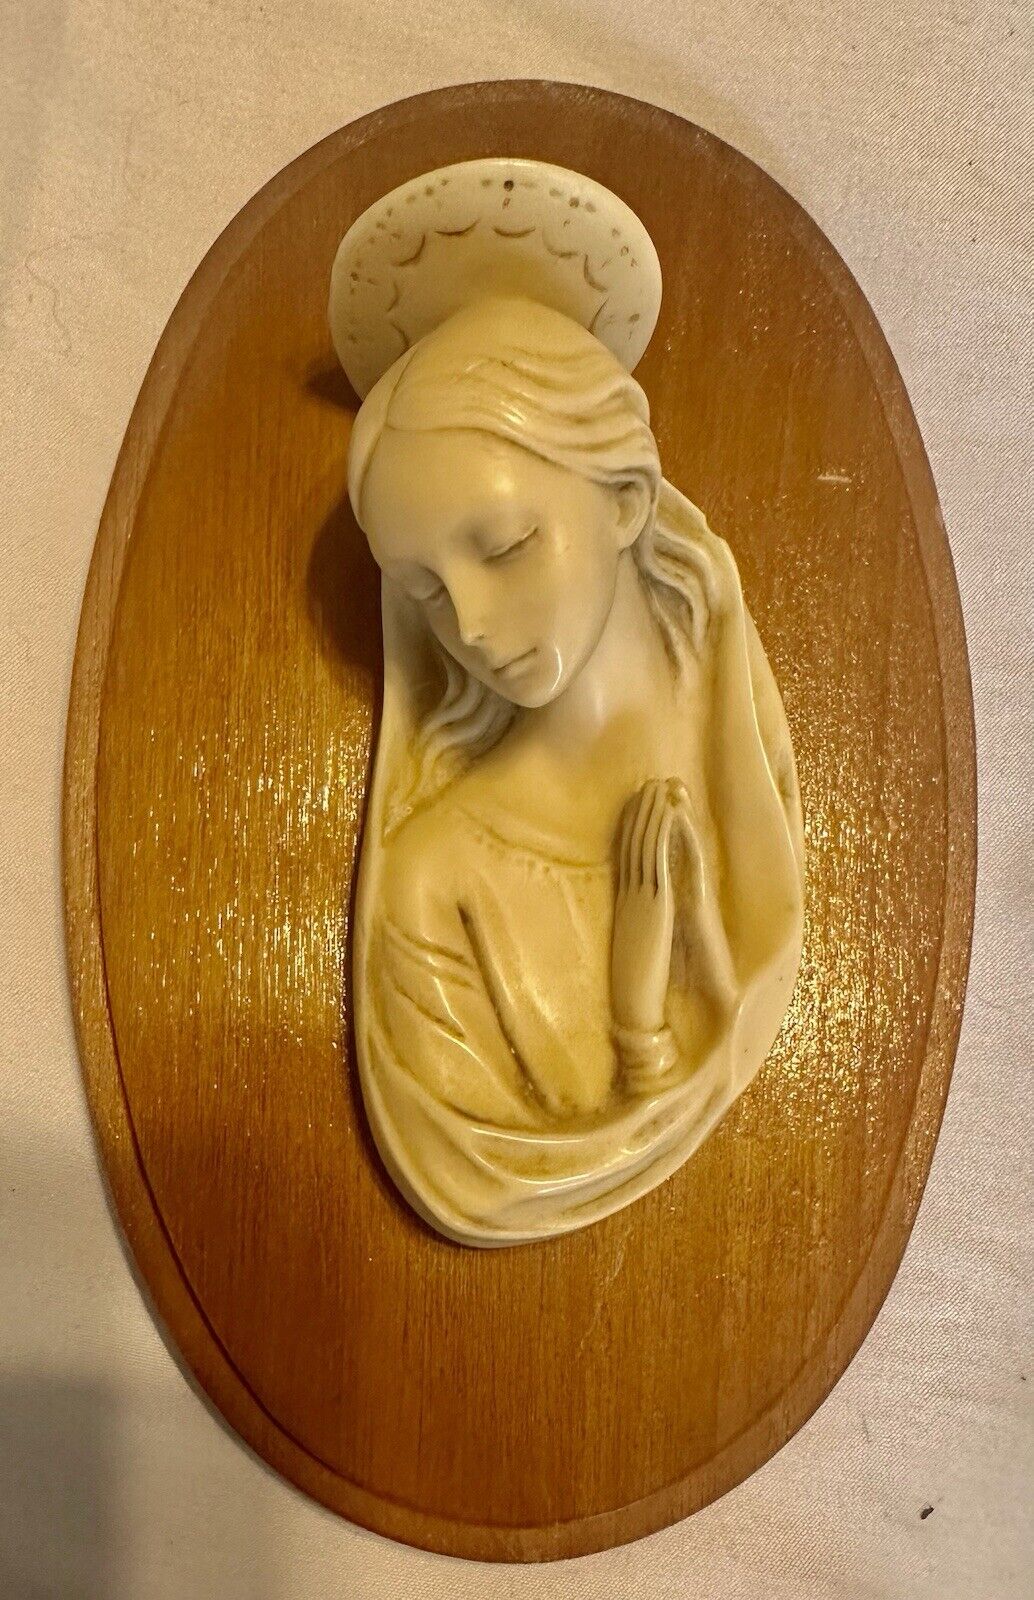 Vintage The Blessed Virgin Mother Mary Sculpture Resin Relief Wood Plaque Art 7”